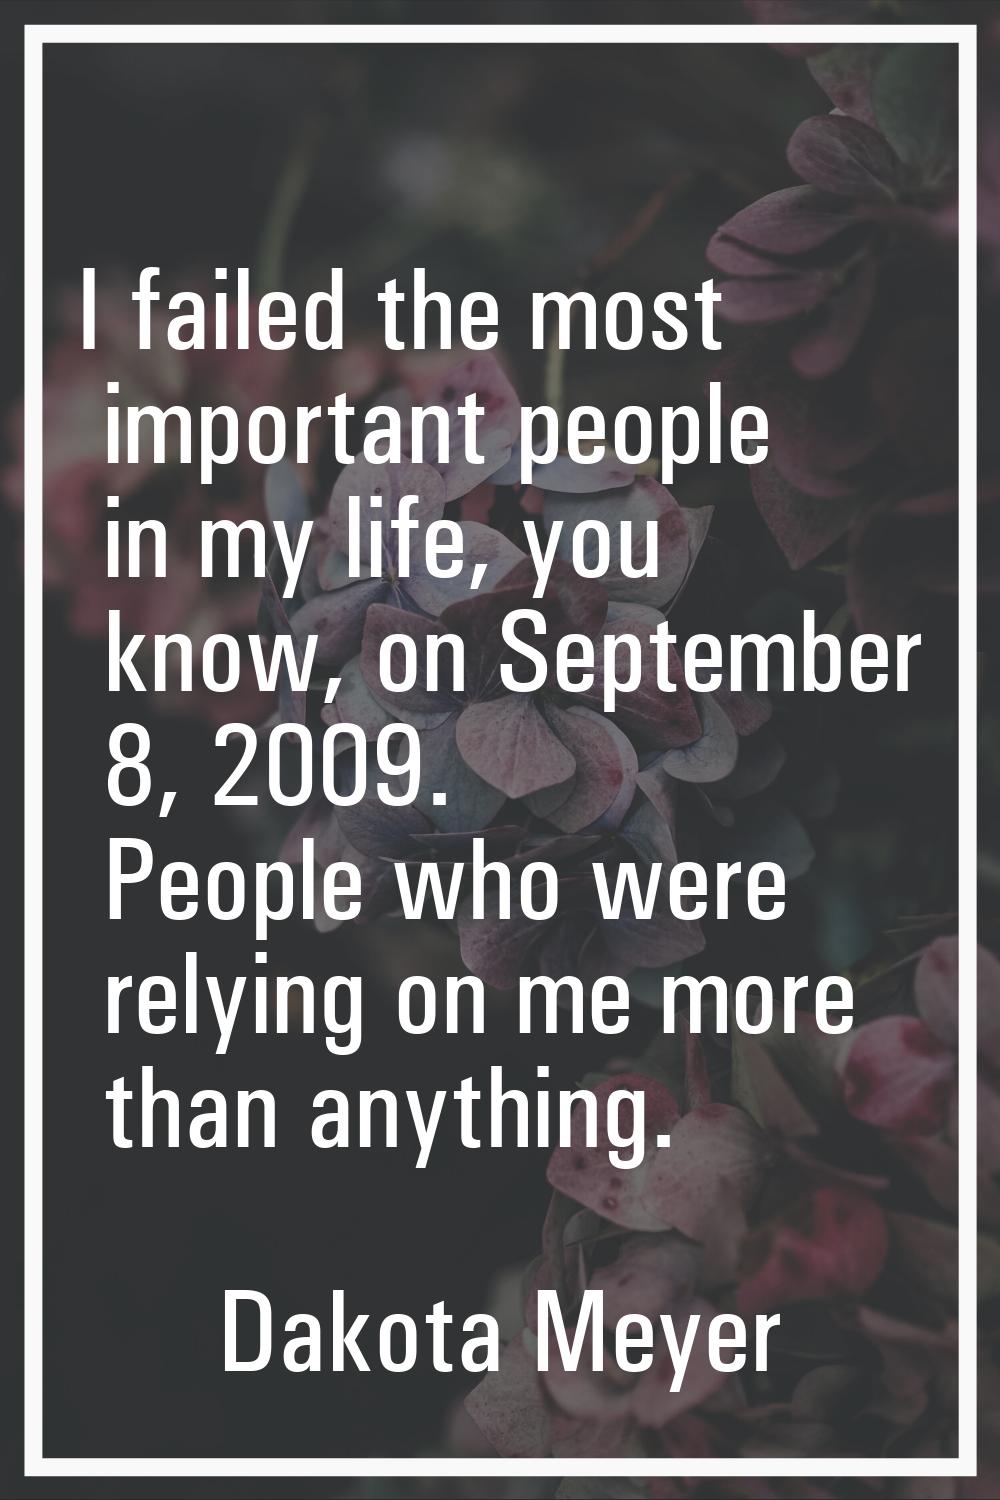 I failed the most important people in my life, you know, on September 8, 2009. People who were rely